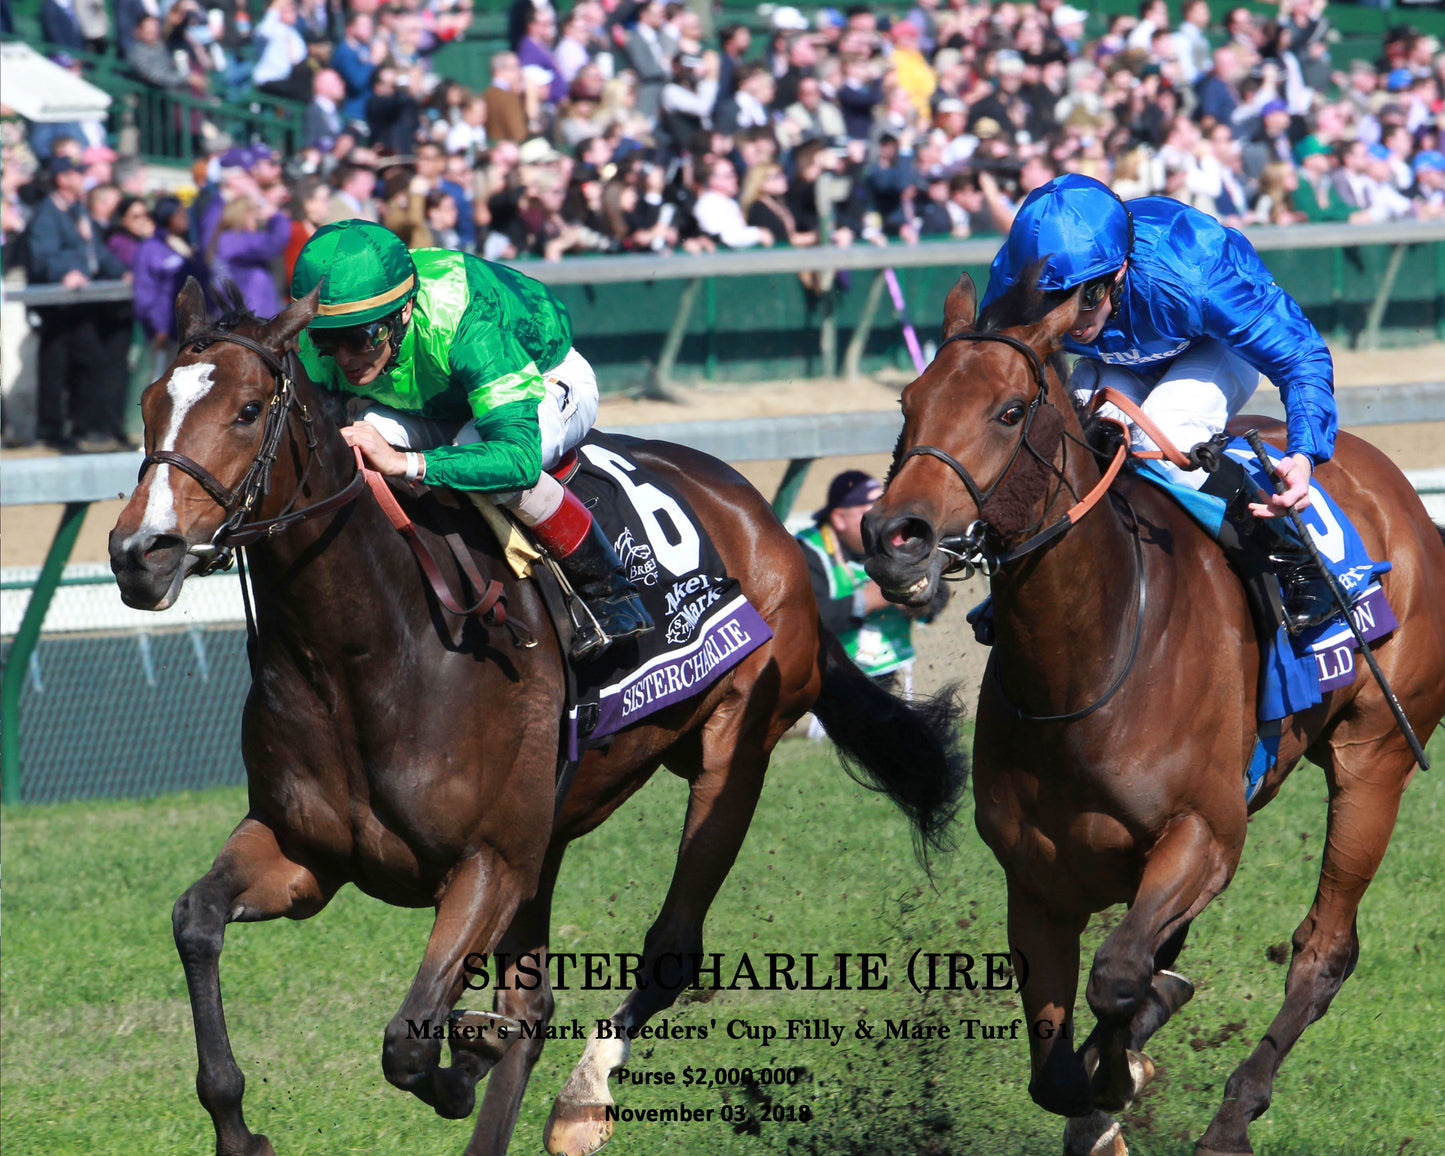 SISTERCHARLIE (IRE) - Maker's Mark Breeders' Cup Filly & Mare Turf G1 - 11-03-18 - R06 - CD - Inside Finish 01 W Ident